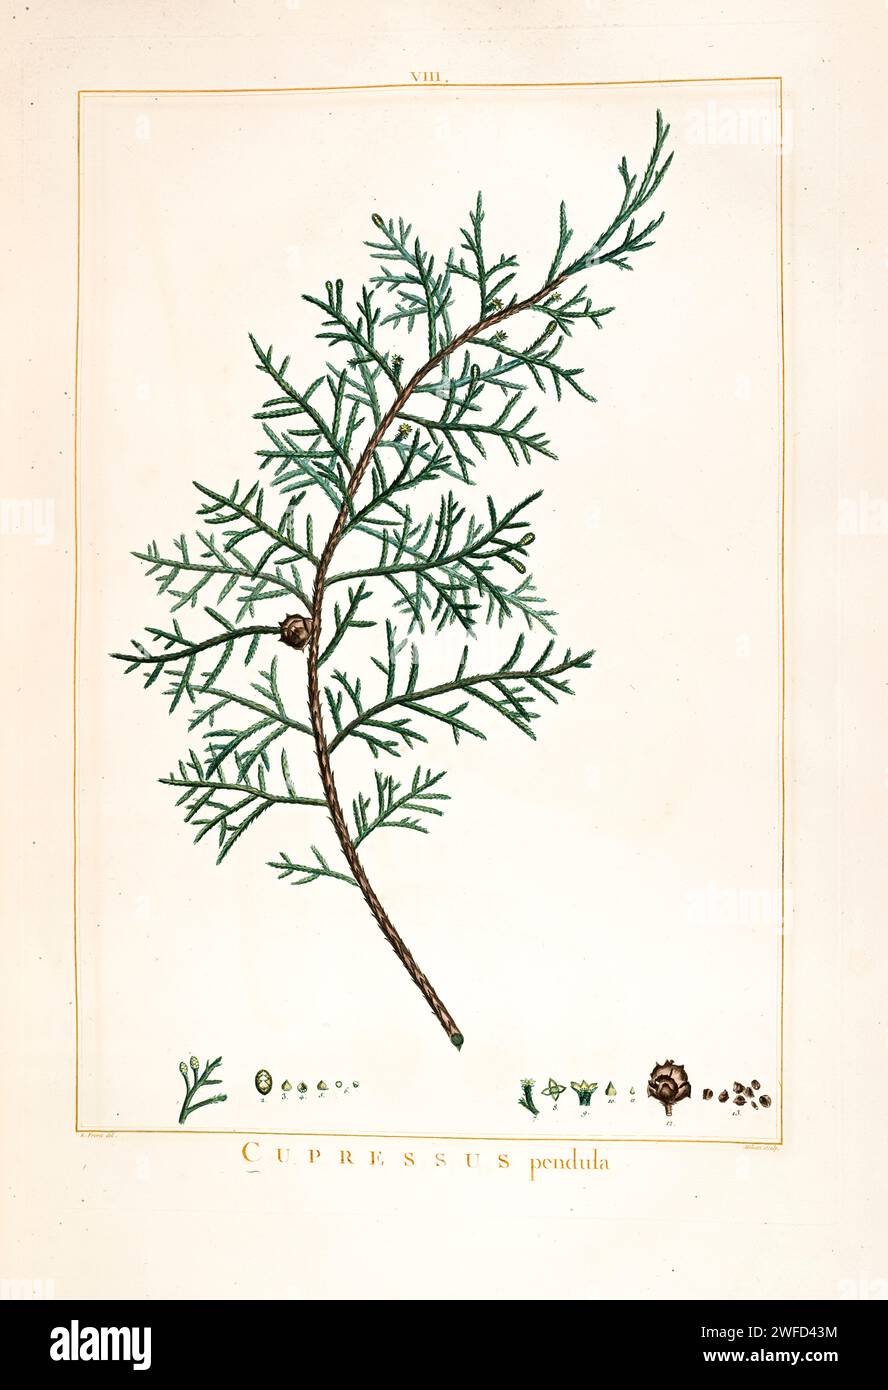 Callitropsis nootkatensis, (here as Cupressus pendula) formerly known as Cupressus nootkatensis ( syn. Xanthocyparis nootkatensis, Chamaecyparis nootkatensis ), is a species of tree in the cypress family native to the coastal regions of northwestern North America. Hand Painted by Pierre-Joseph Redouté in 1784 Stock Photo